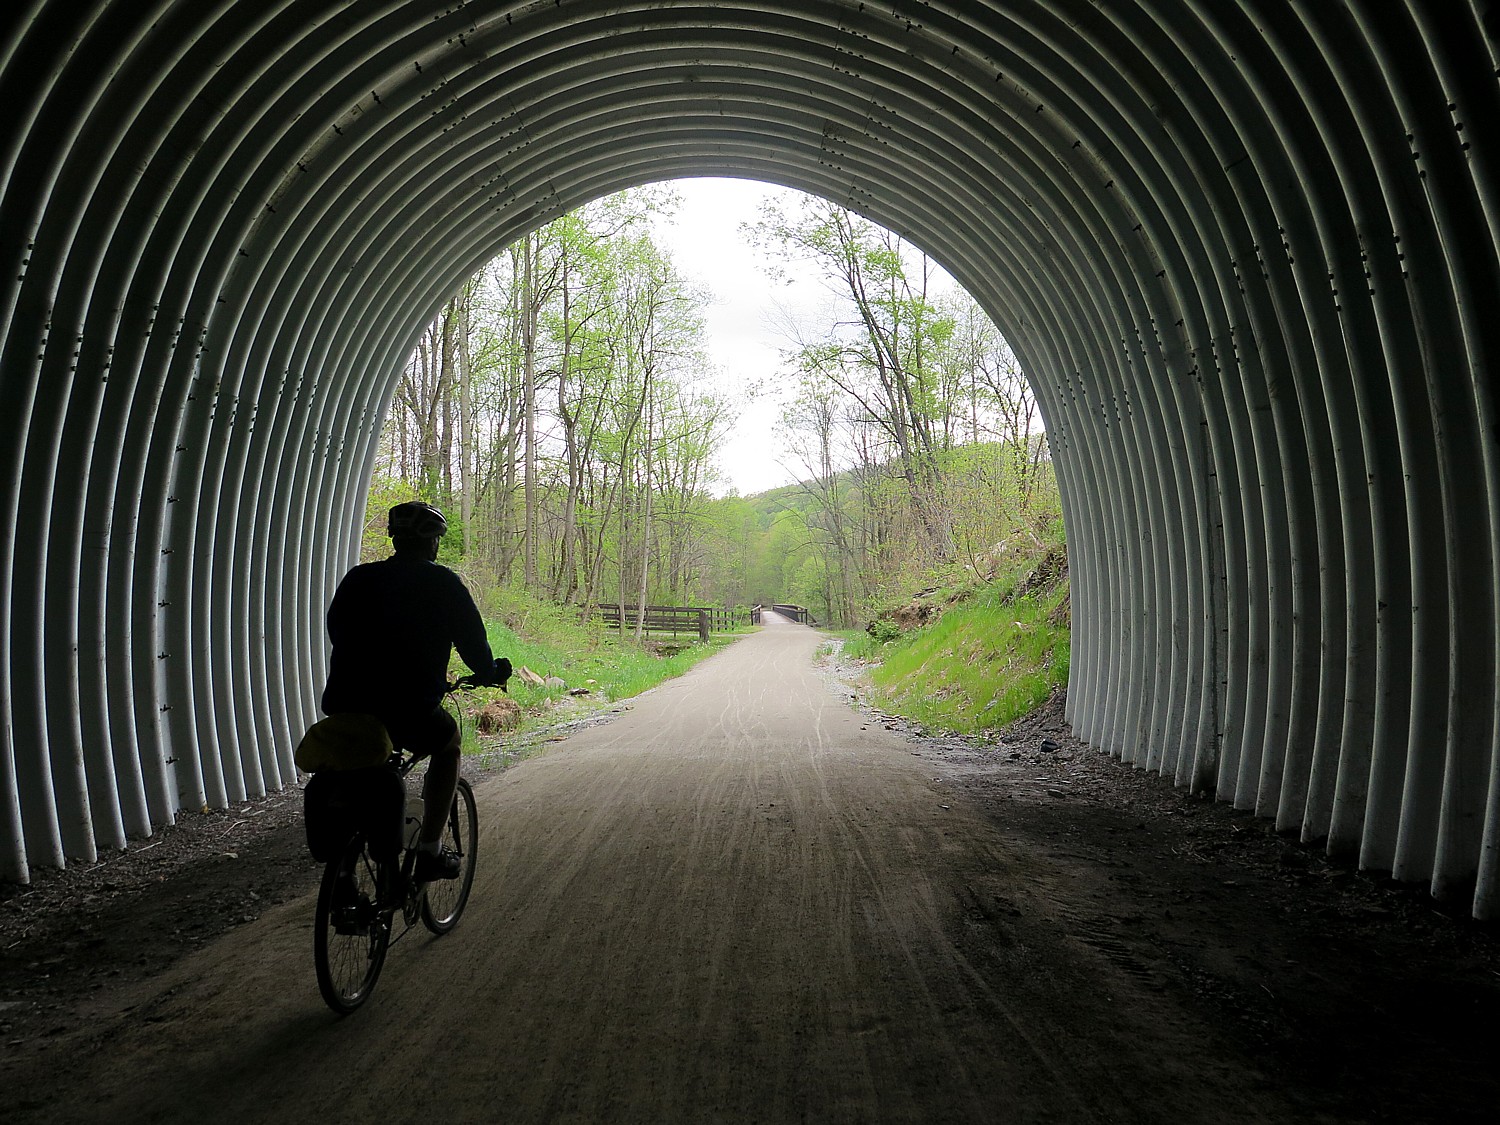 A highlight of this section of the Great Allegheny Passage ride is going through the Pinkerton Tunnel, only recently rebuilt and reopened © 2016 Karen Rubin/goingplacesfarandnear.com